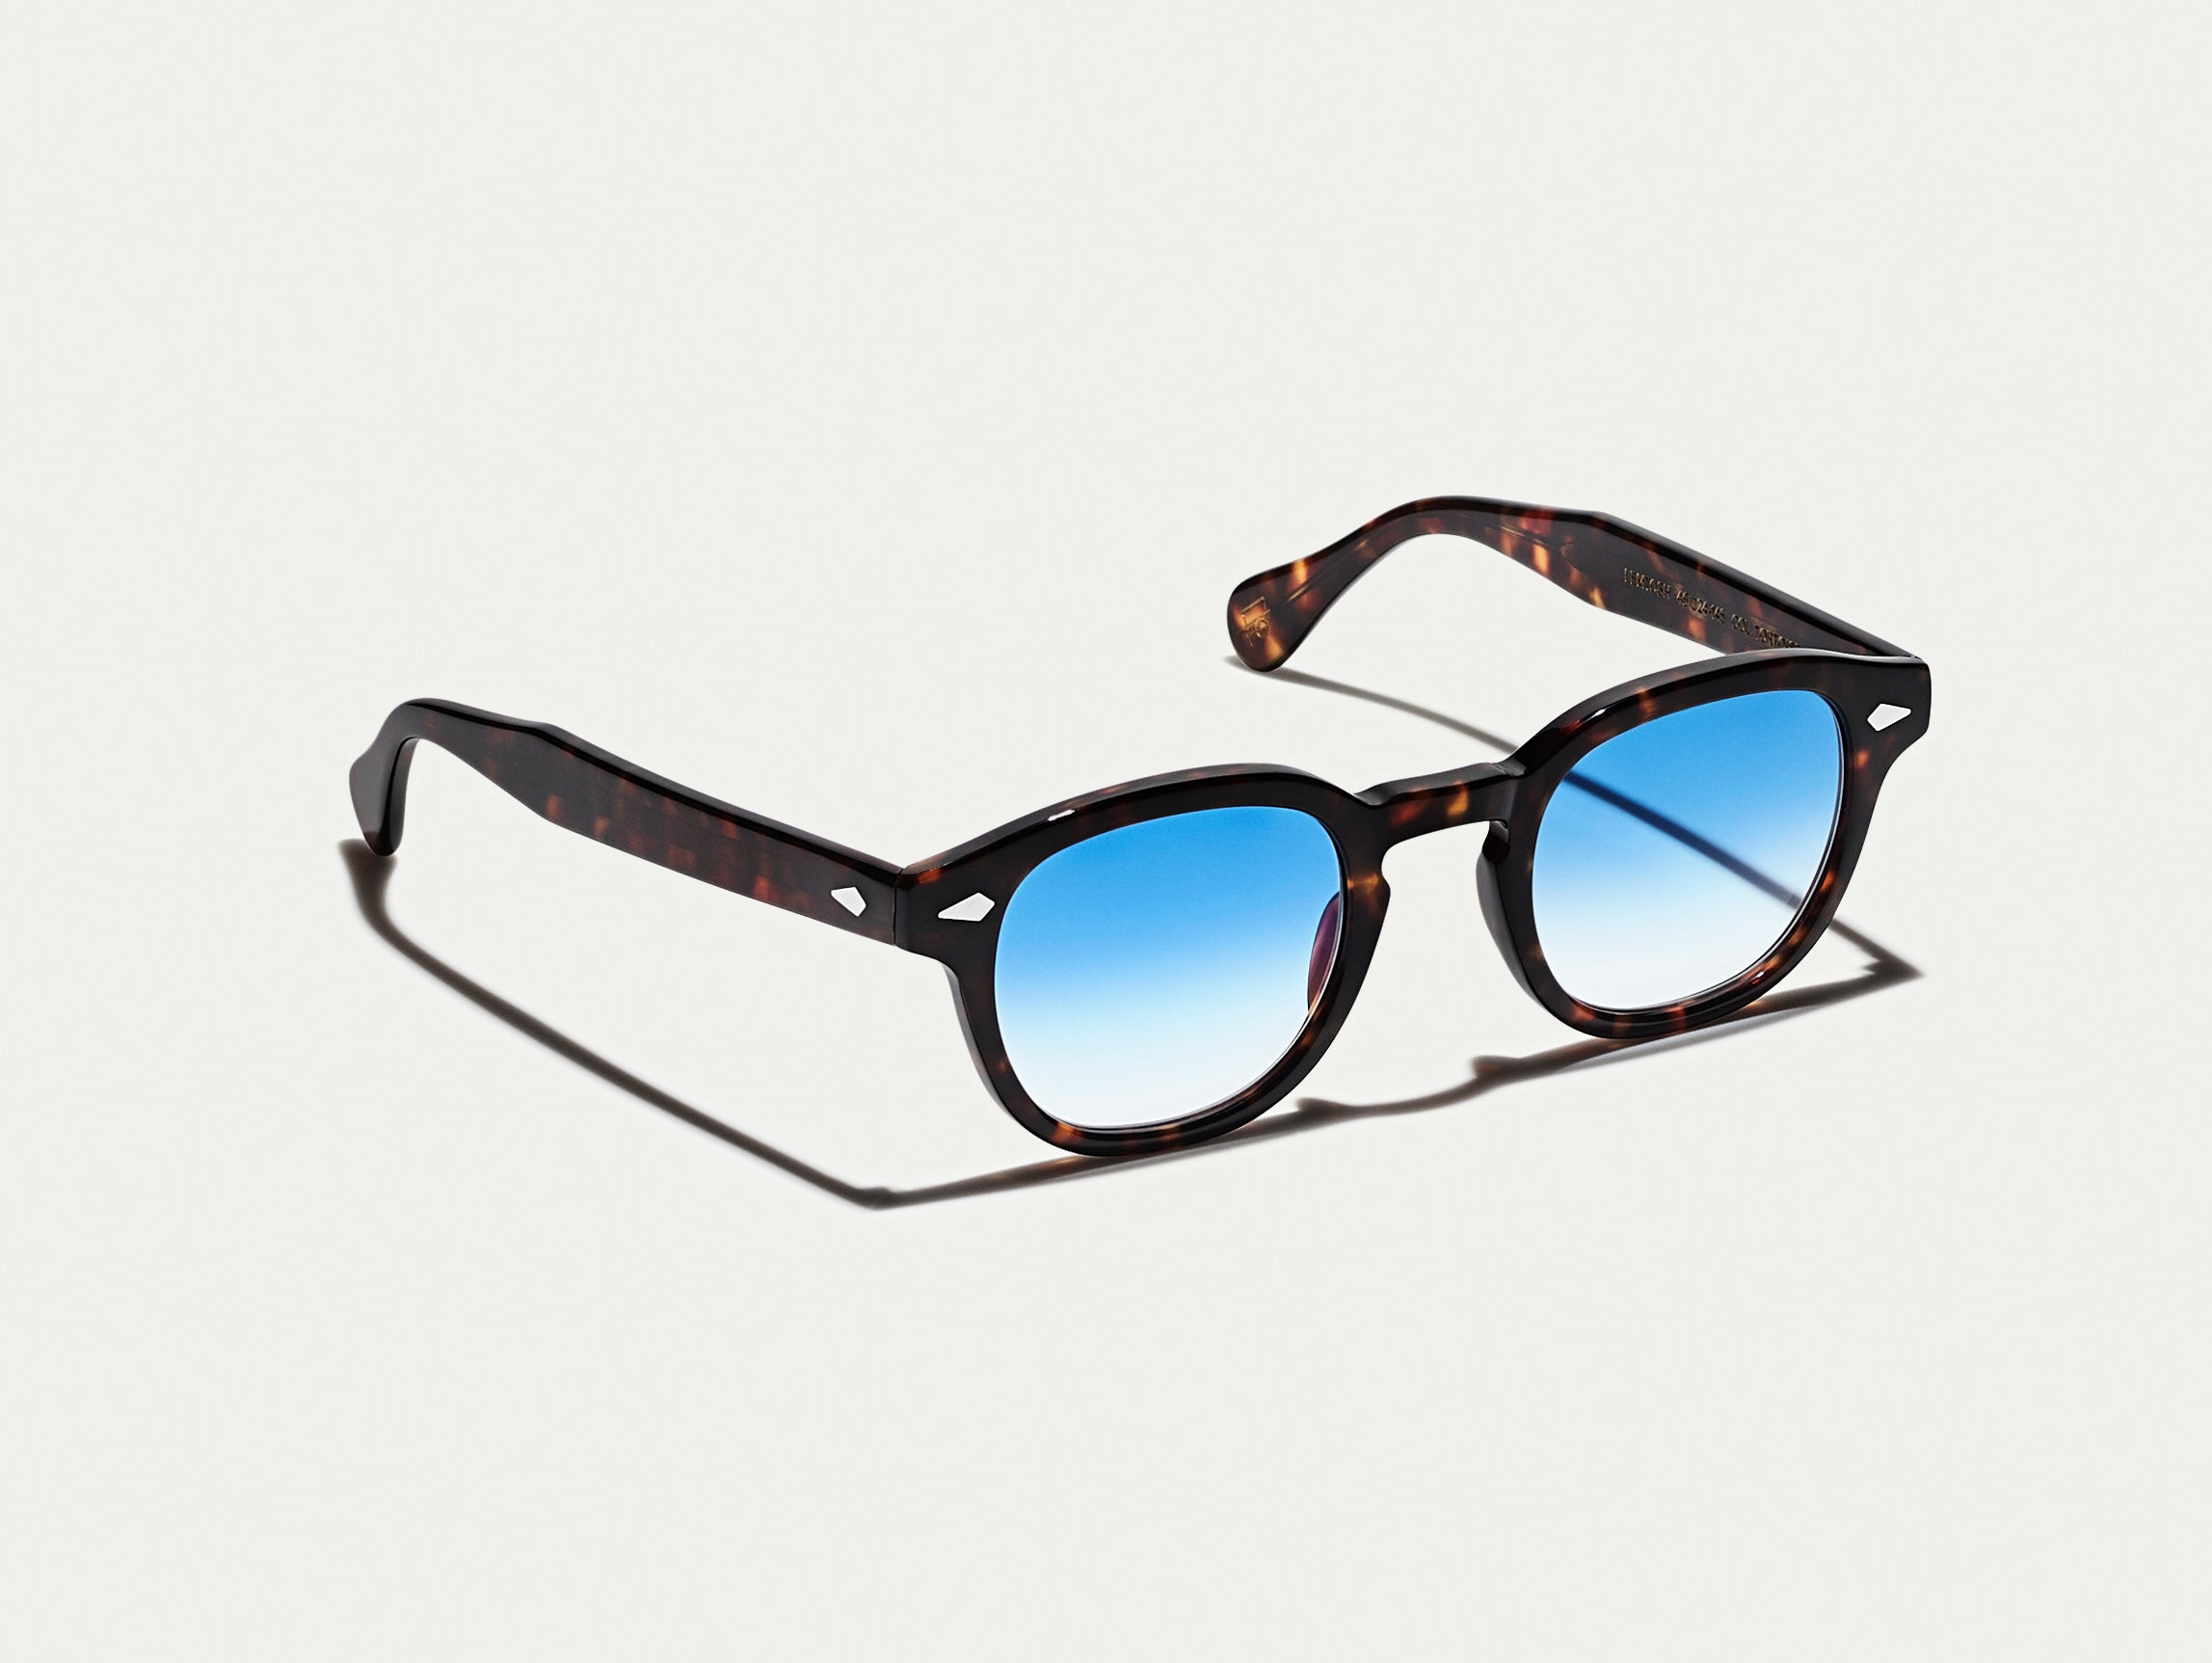 The LEMTOSH Tortoise with Broadway Blue Fade Tinted Lenses